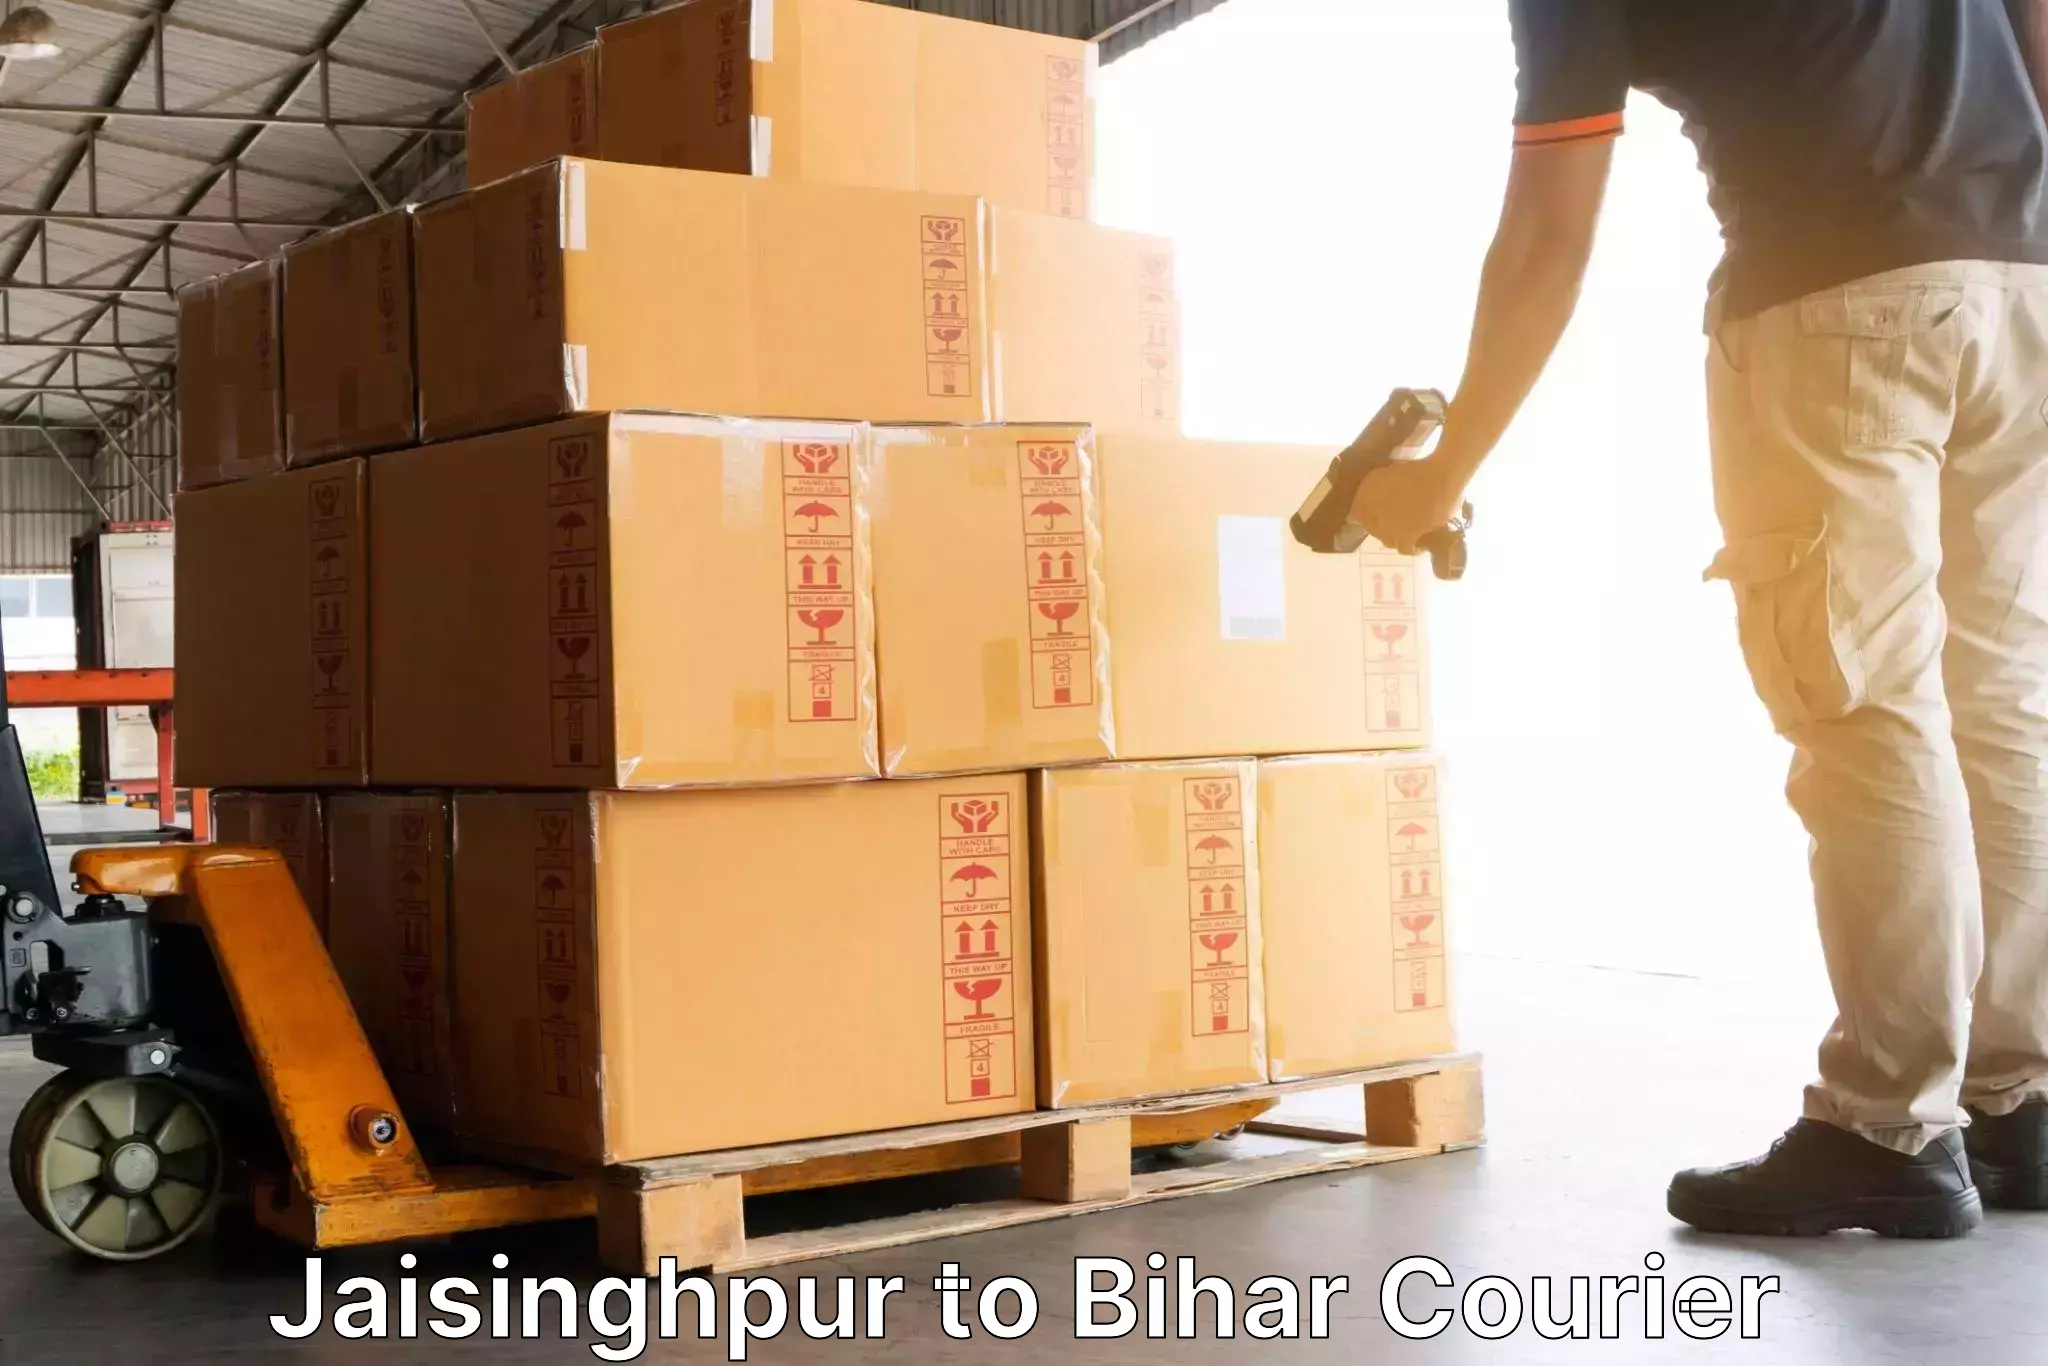 Courier service booking in Jaisinghpur to Sheohar